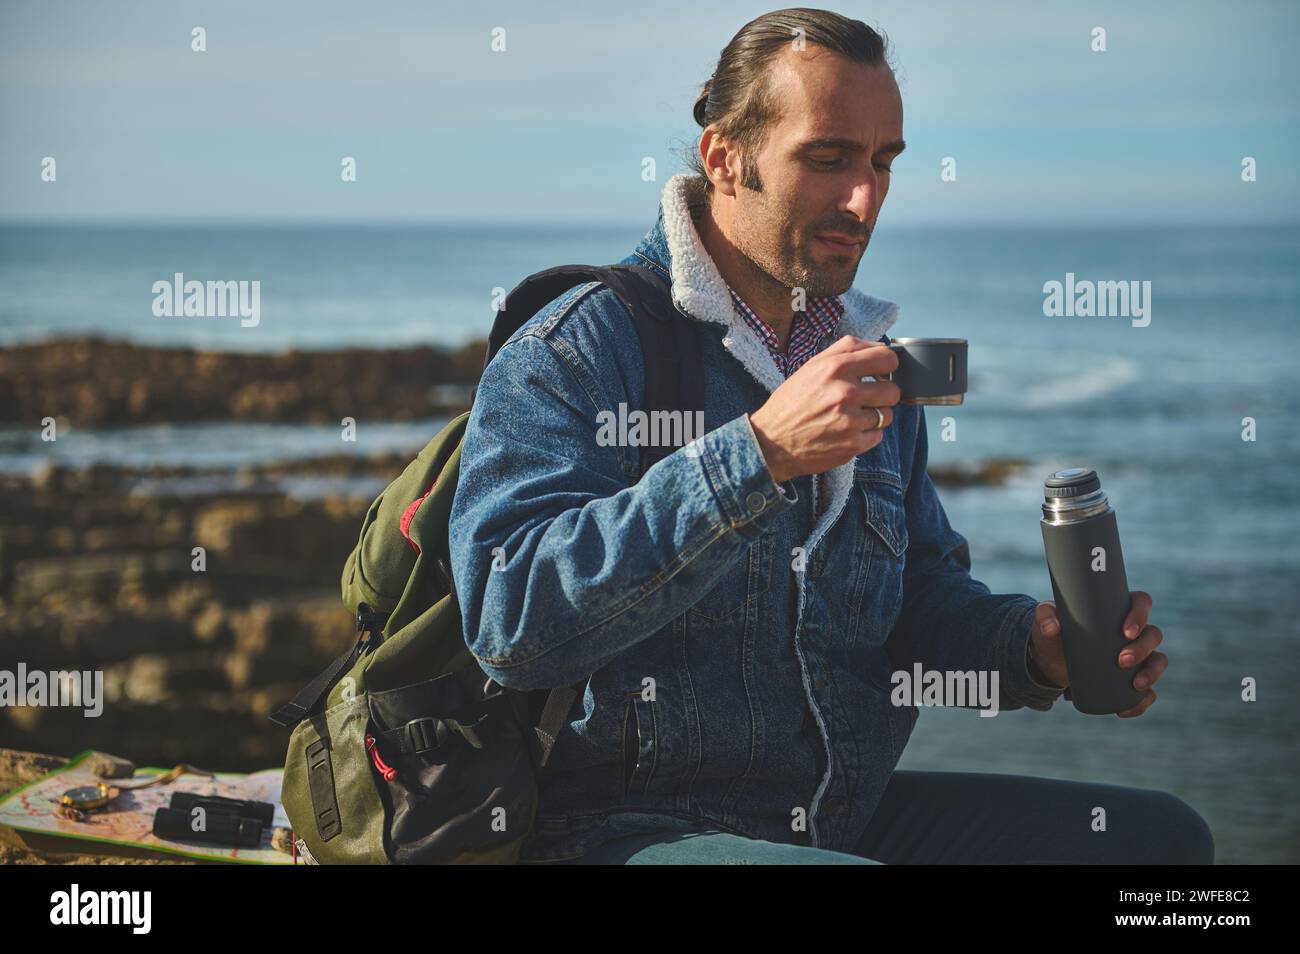 Handsome traveler man holding thermos flask and drinking tea or coffee from stainless steel mug, sitting on the rock by sea, enjoying a happy day outd Stock Photo